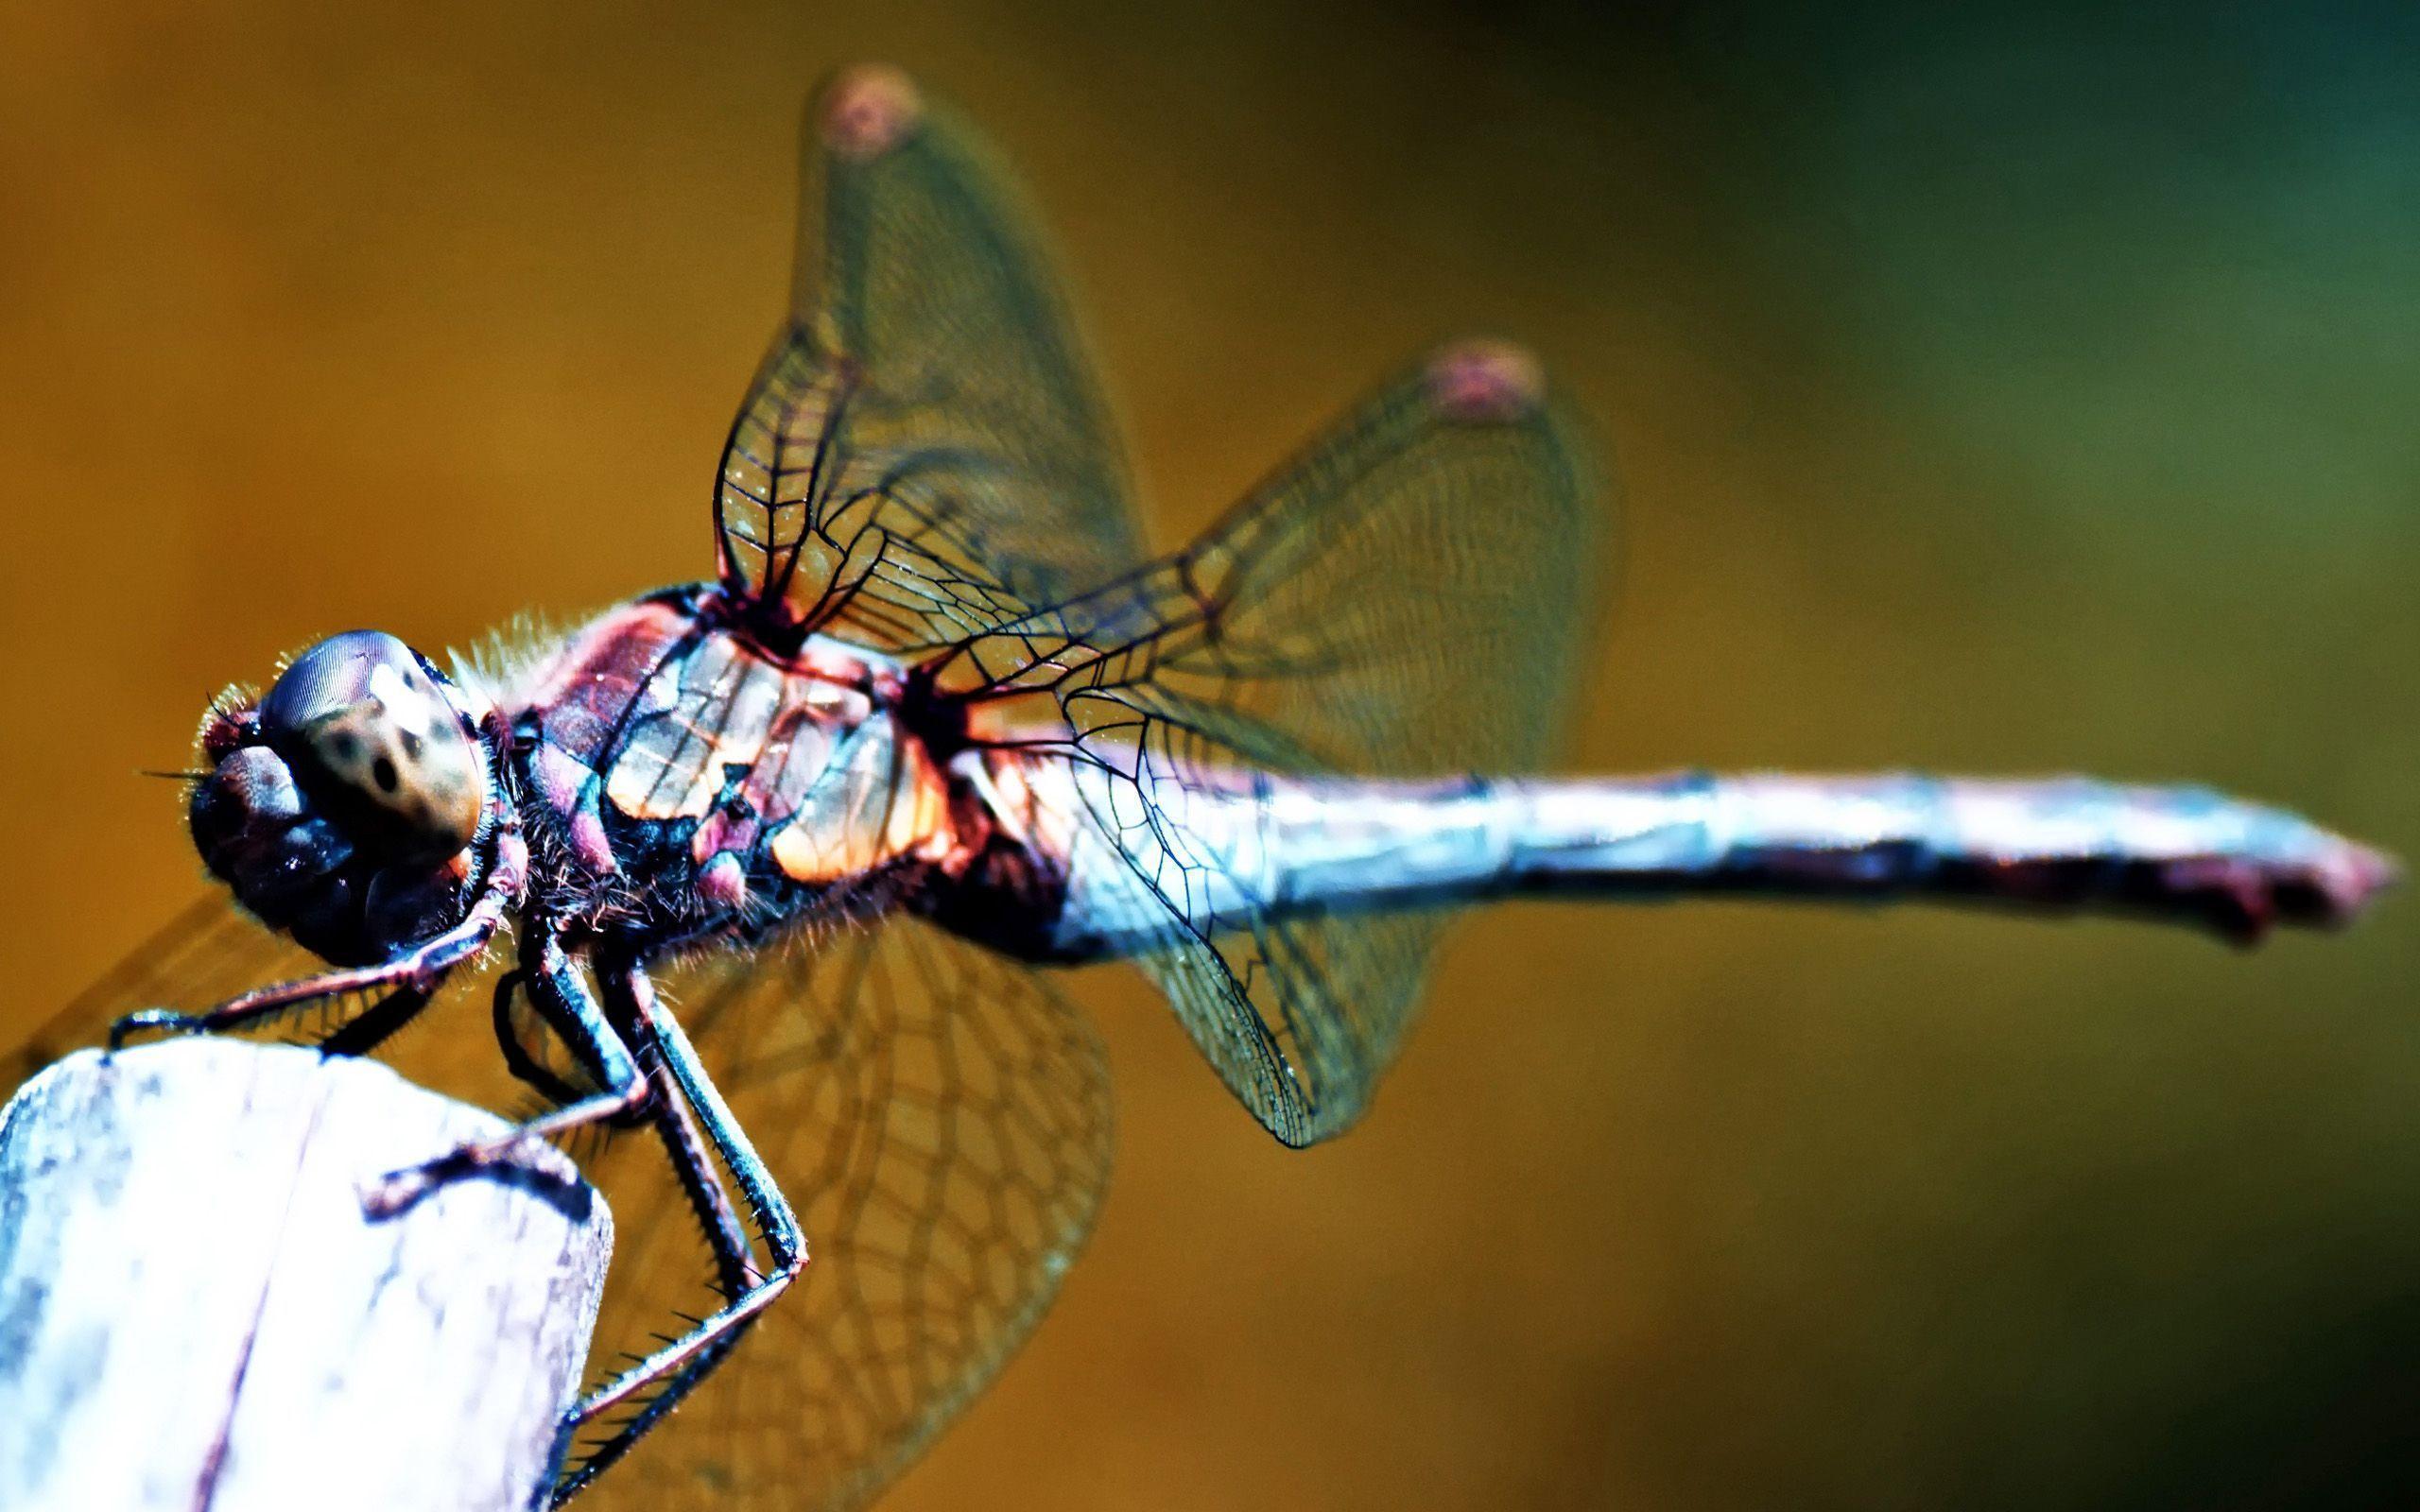 Dragonfly Wallpaper 39232 2560x1600 px